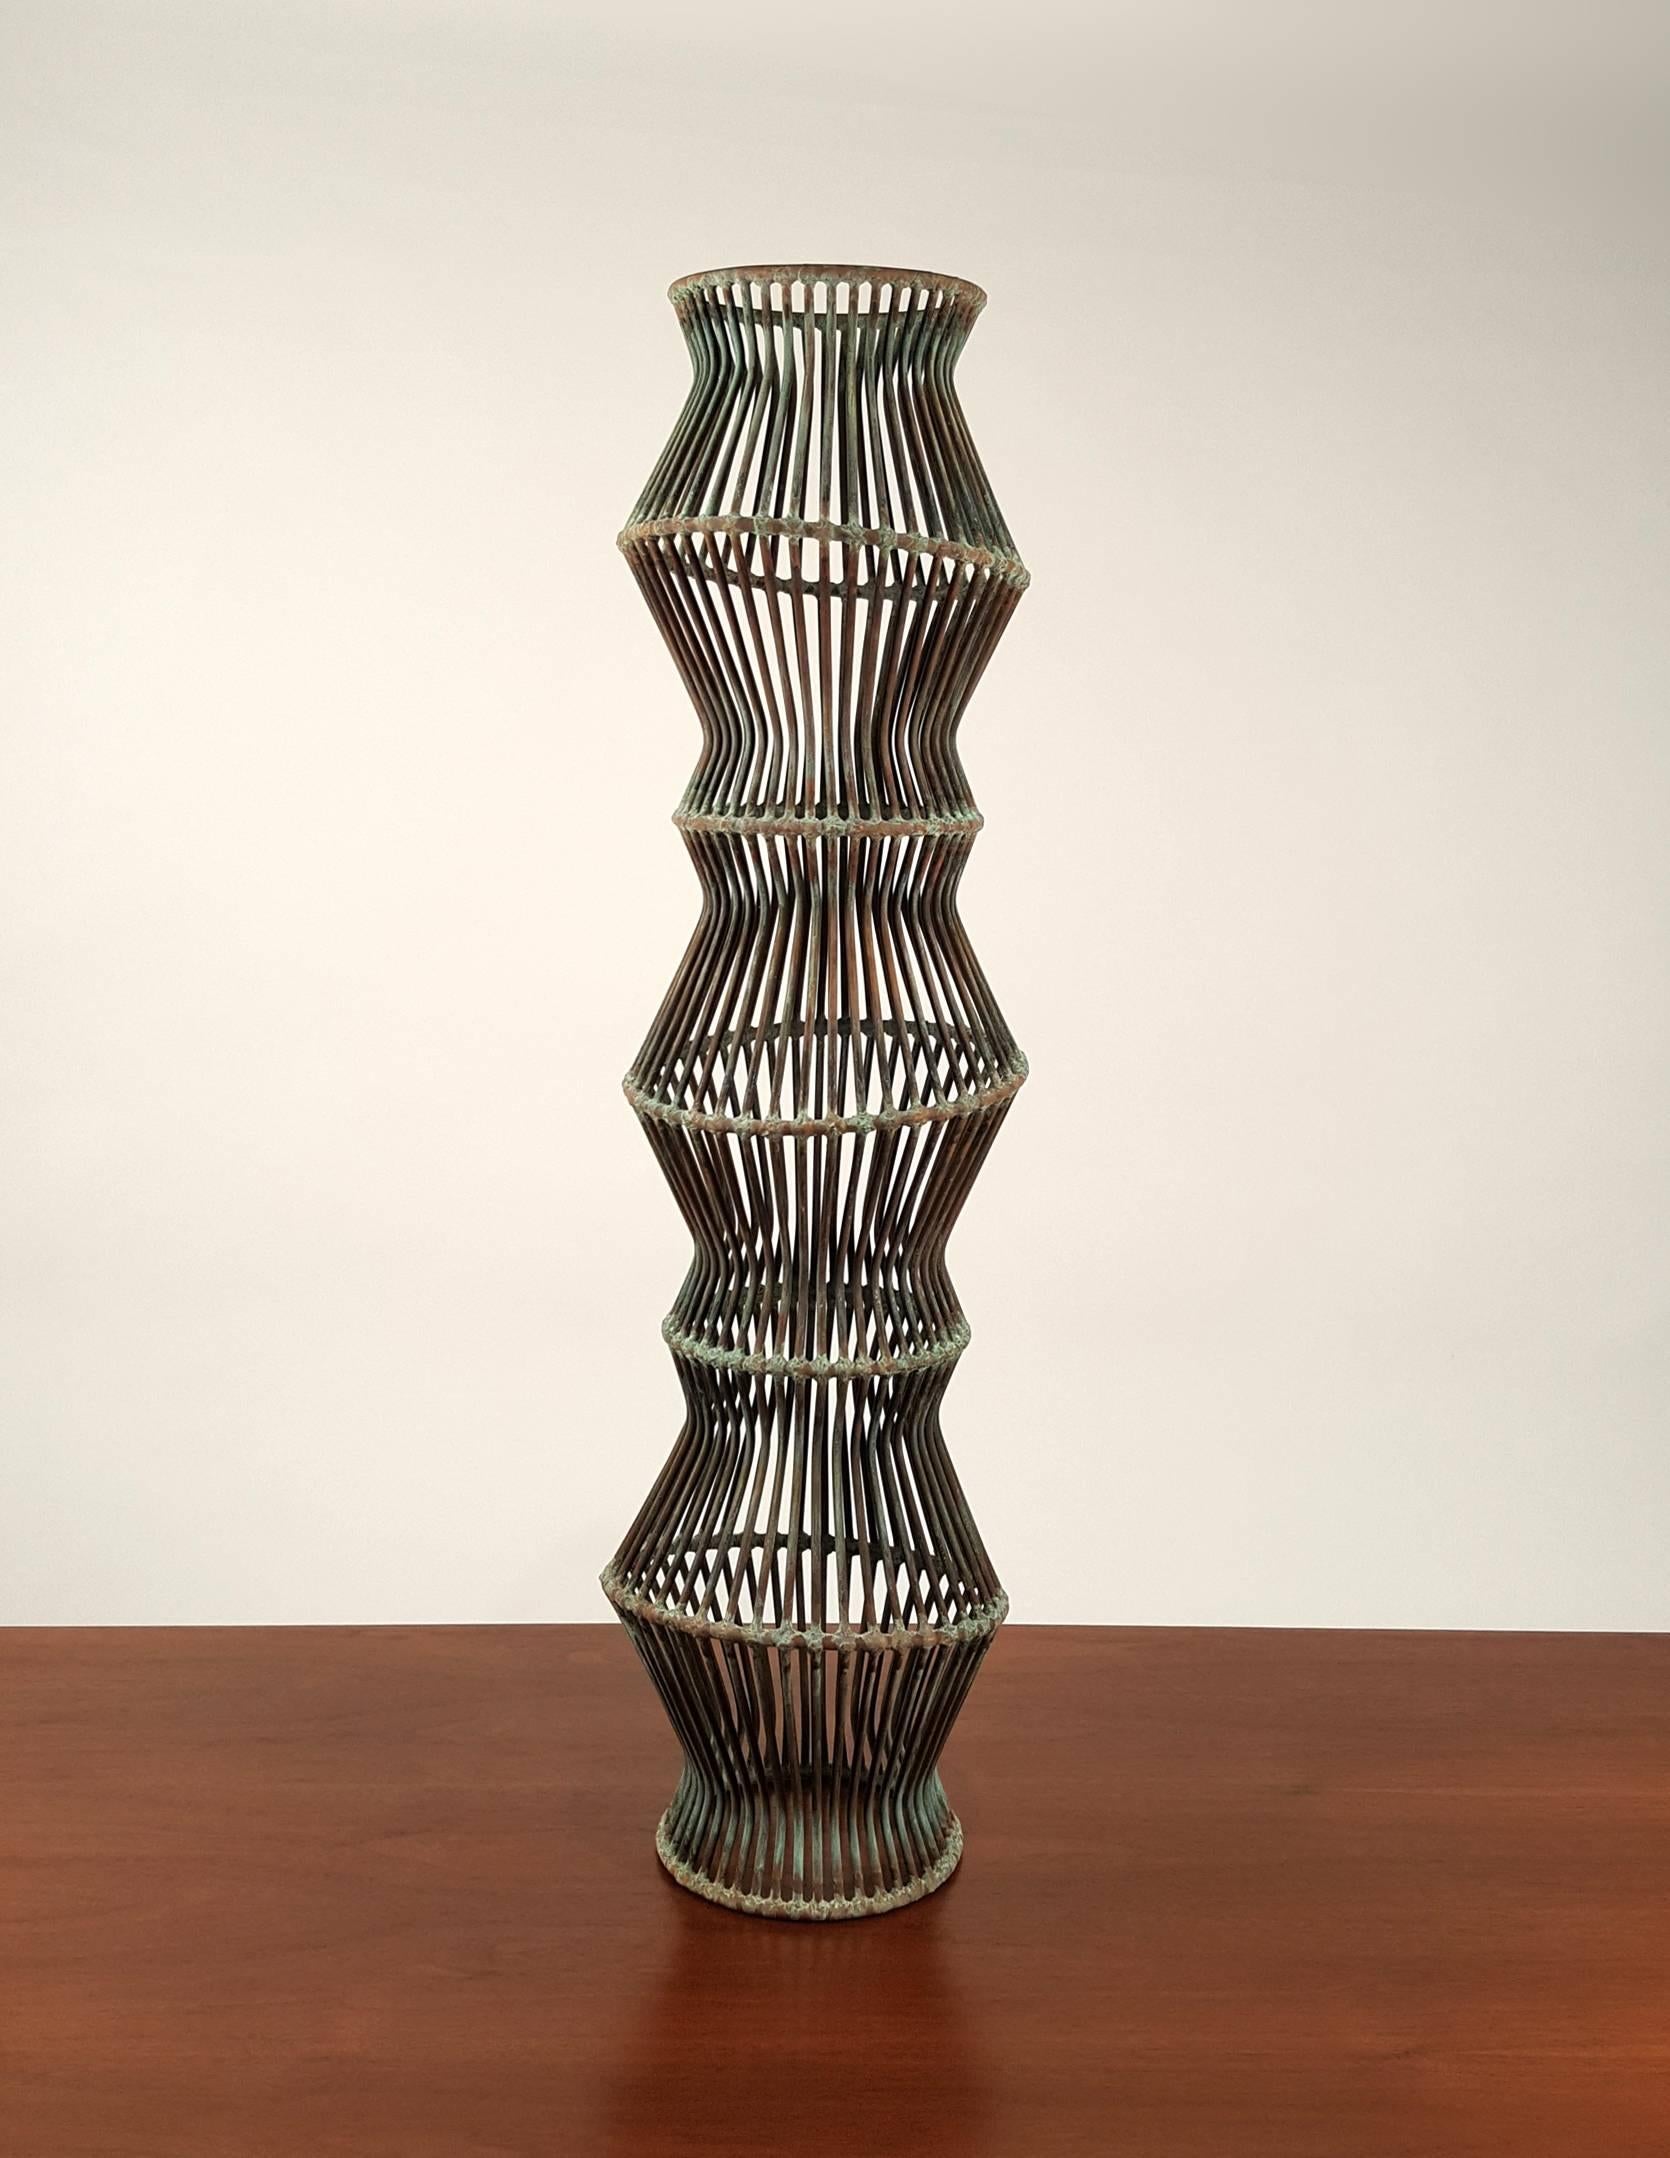 Amazing hand welded undulating copper and bronze rod sculpture with a Verdigris patina created by contemporary sculptor Douglas Ihlenfeld. This work is a one of a kind piece from his 'progression' series. The sculpture displays well from every angle